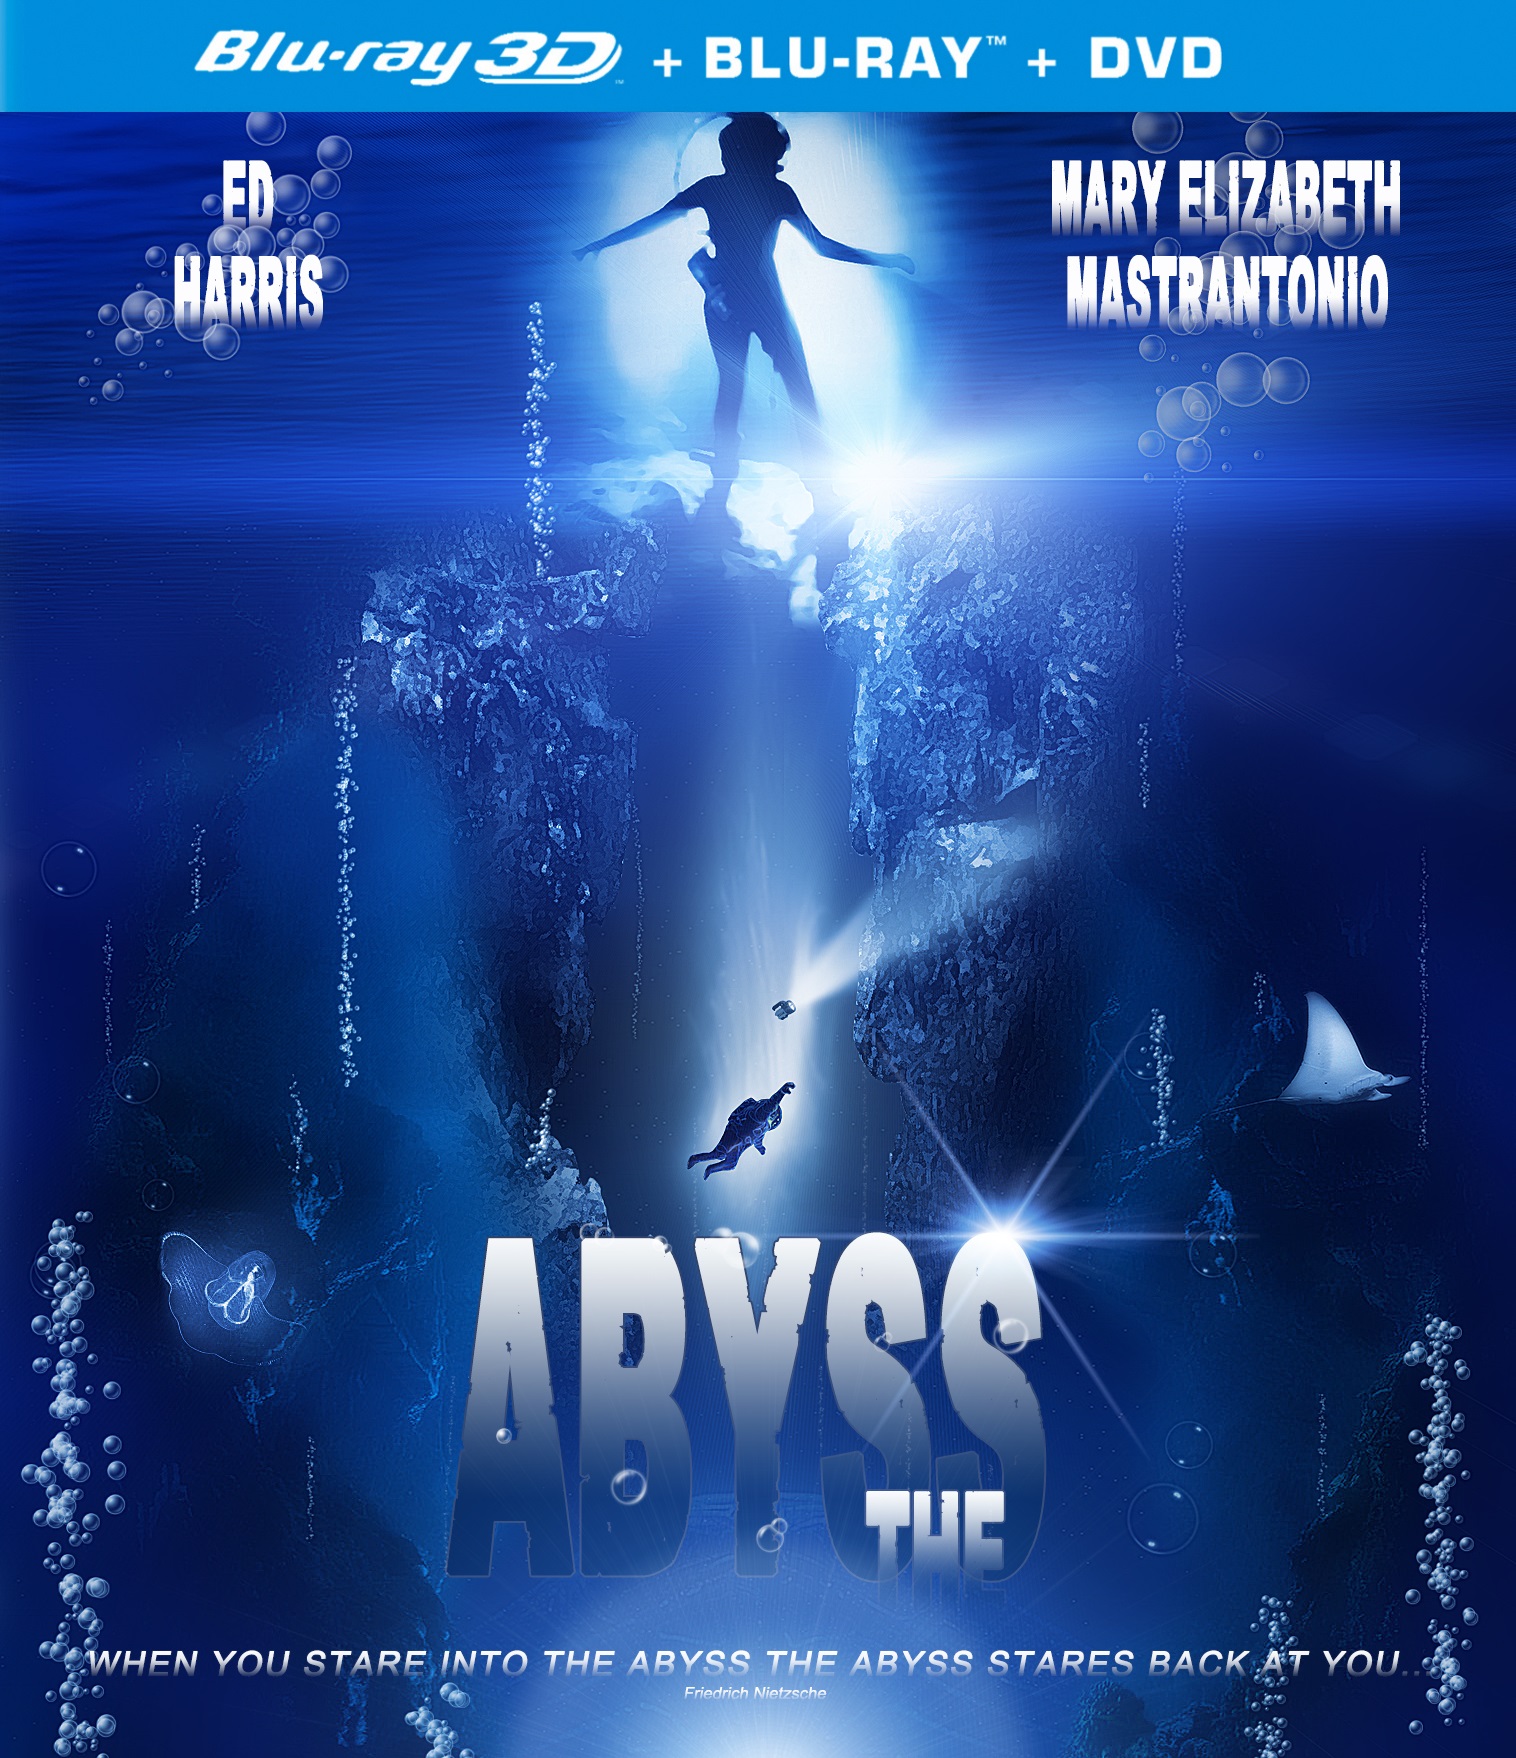 The Abyss 1989 Theatrical Cut 3D Conversion 1080p MVC Atmos 7.1 eng fra spa doogle